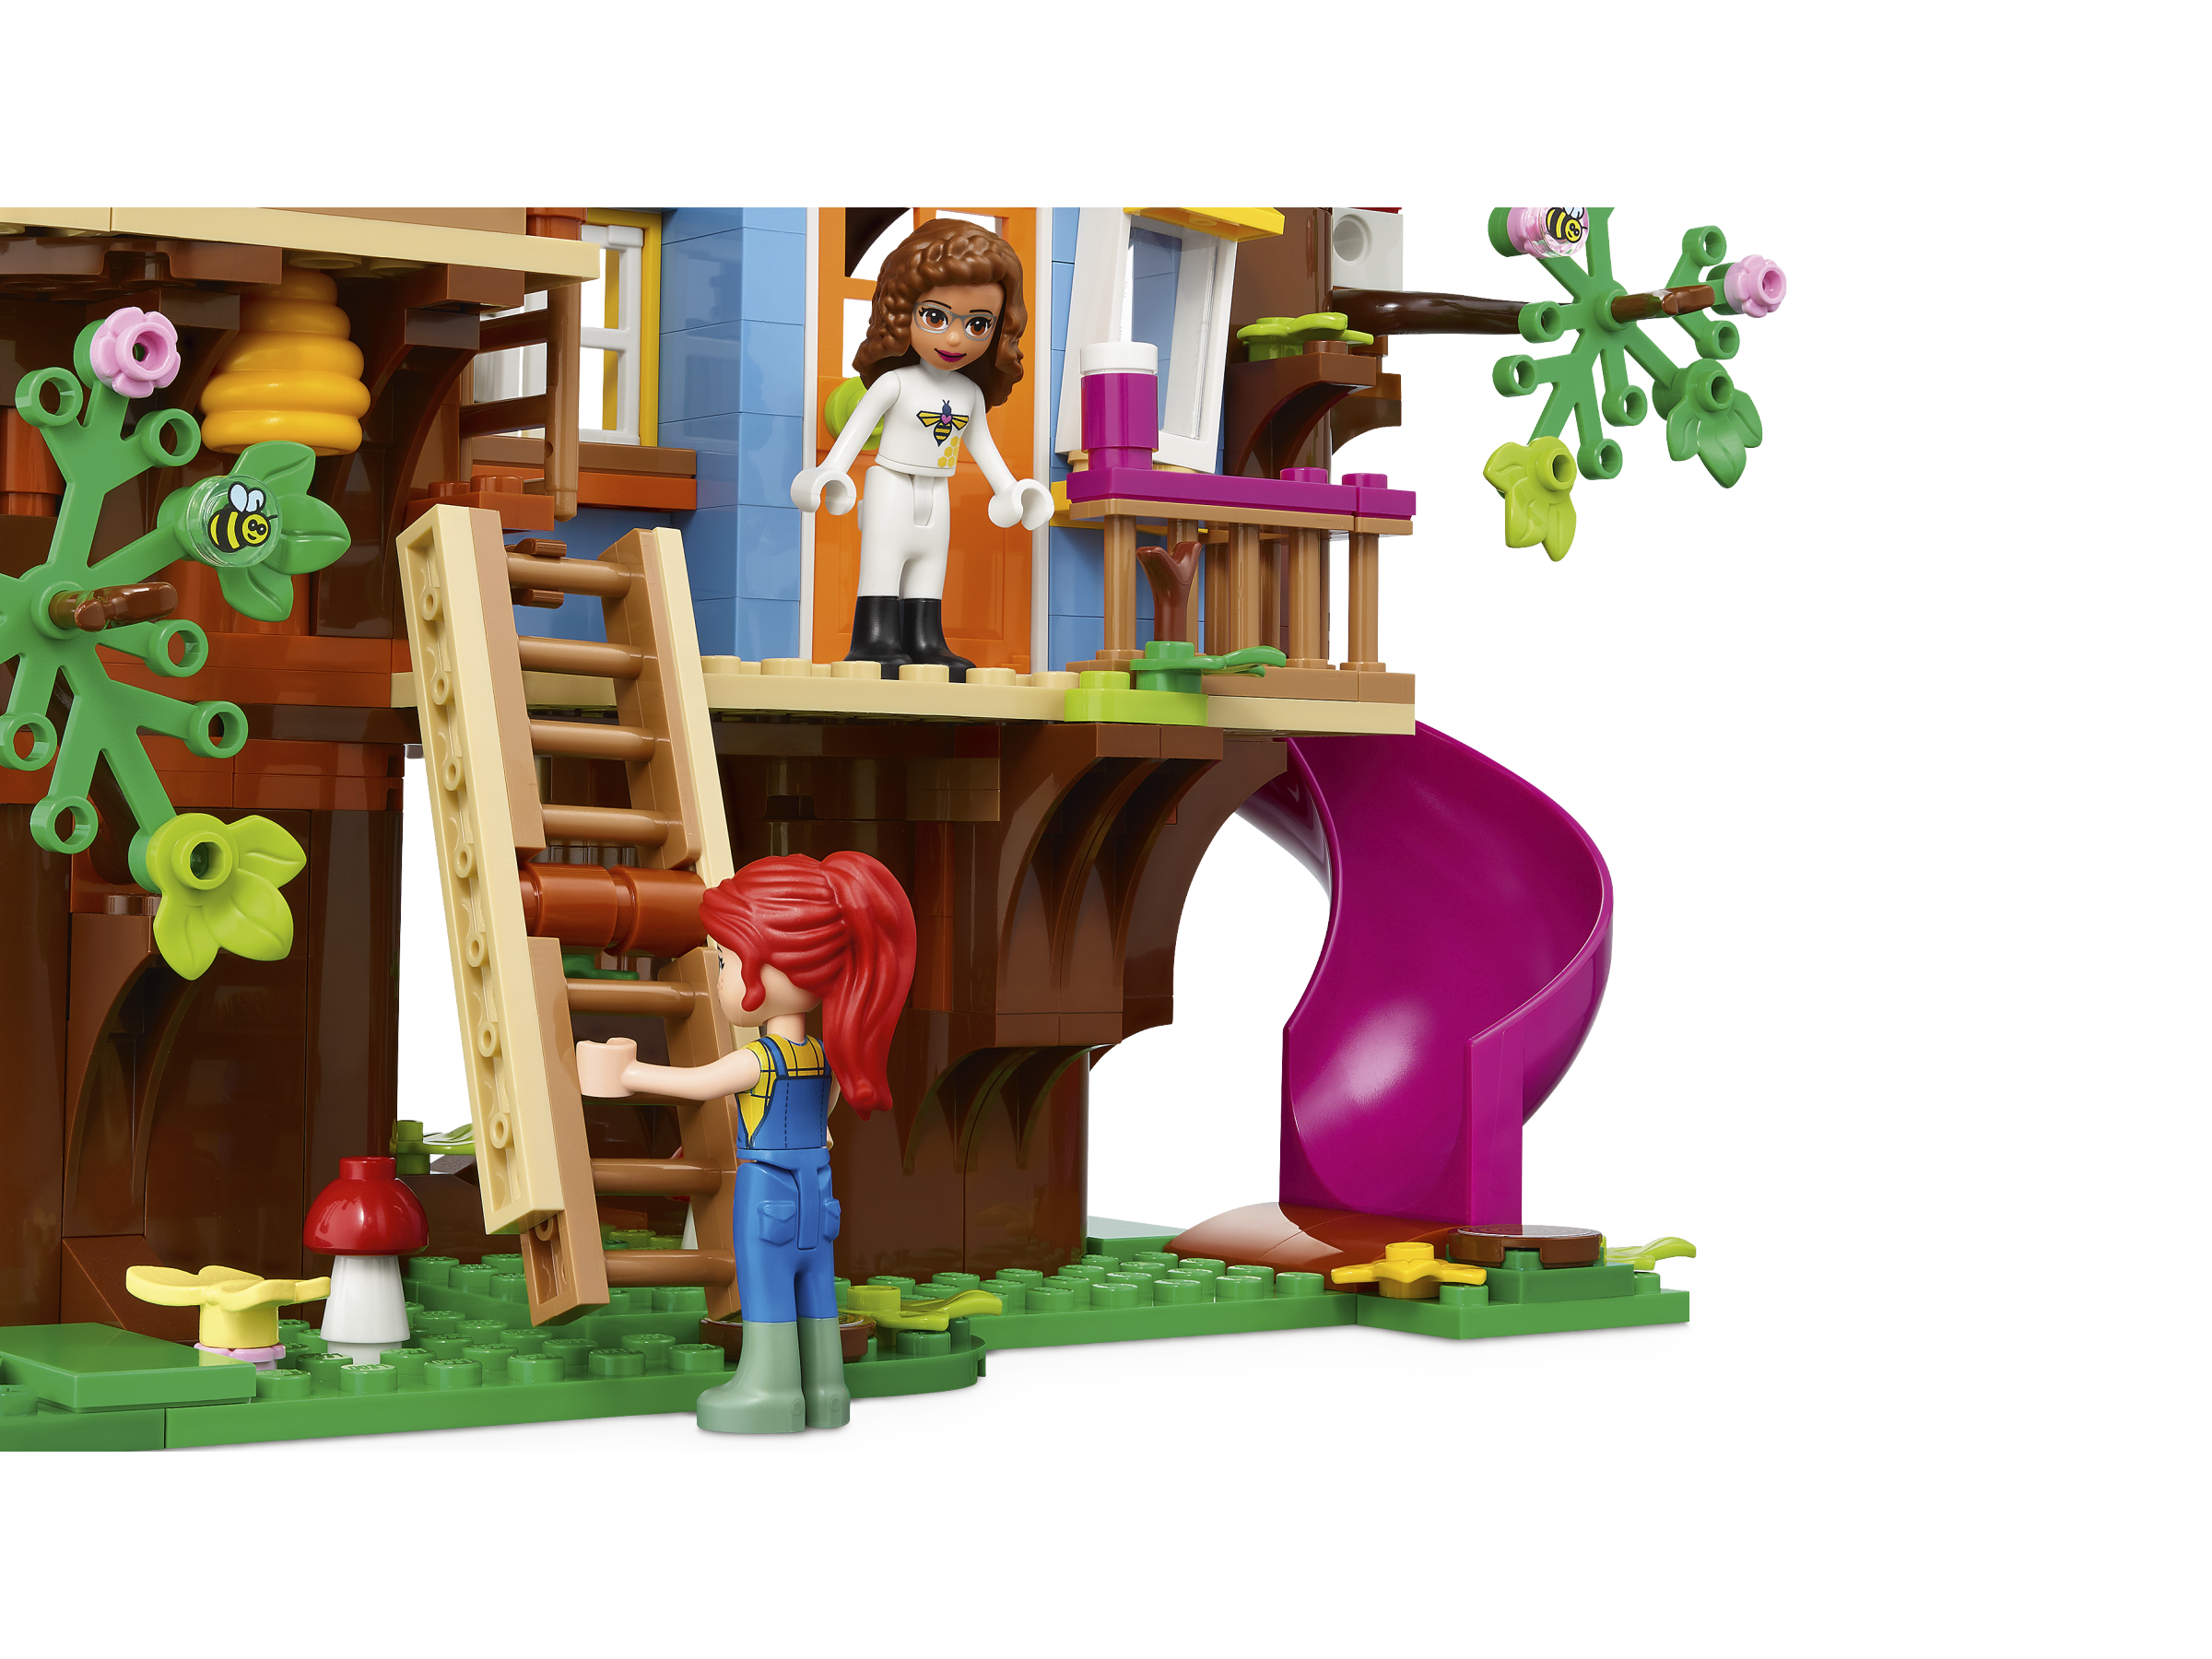 Lego Friends Friendship Tree House 41703 - Albagame